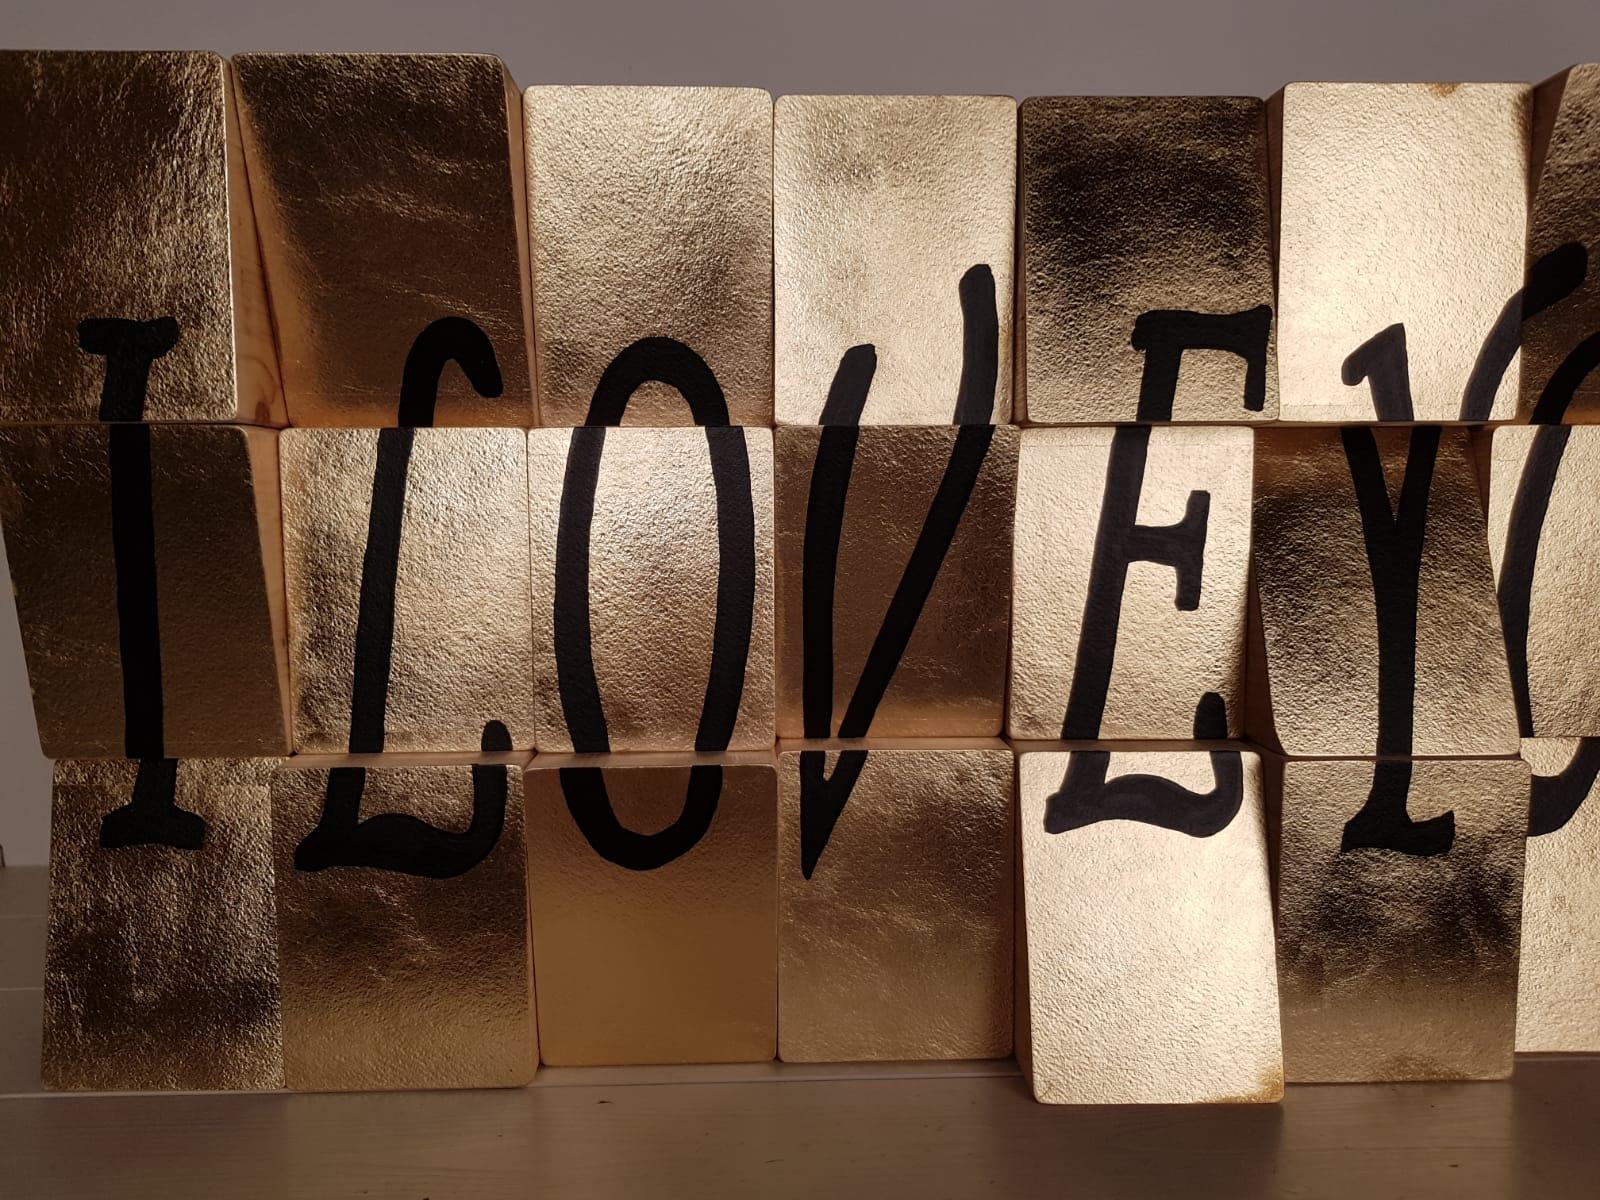 I Love You is an Original, Conceptual, Contemporary Art Piece.  Acrylic Paint on Canvas applied onto Wooden Blocks Personally Signed. 
Each block is then painted with acrylic paint on Acrylic Paint on Cotton Paper. If miscalculated at any point of